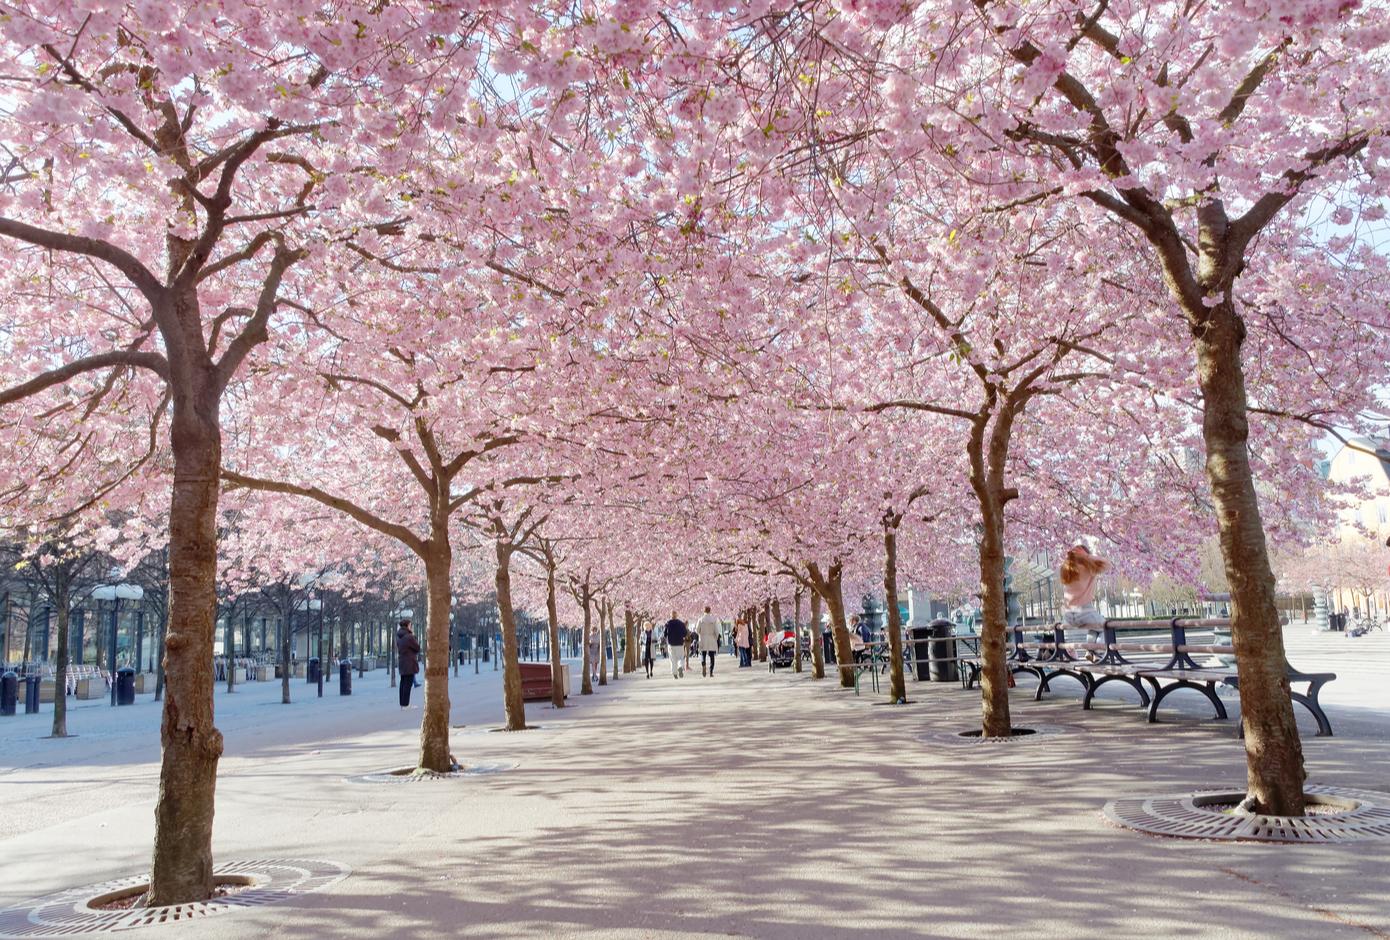 Kungstradgarden with a blooming cherry tree avenue, in Stockholm.
